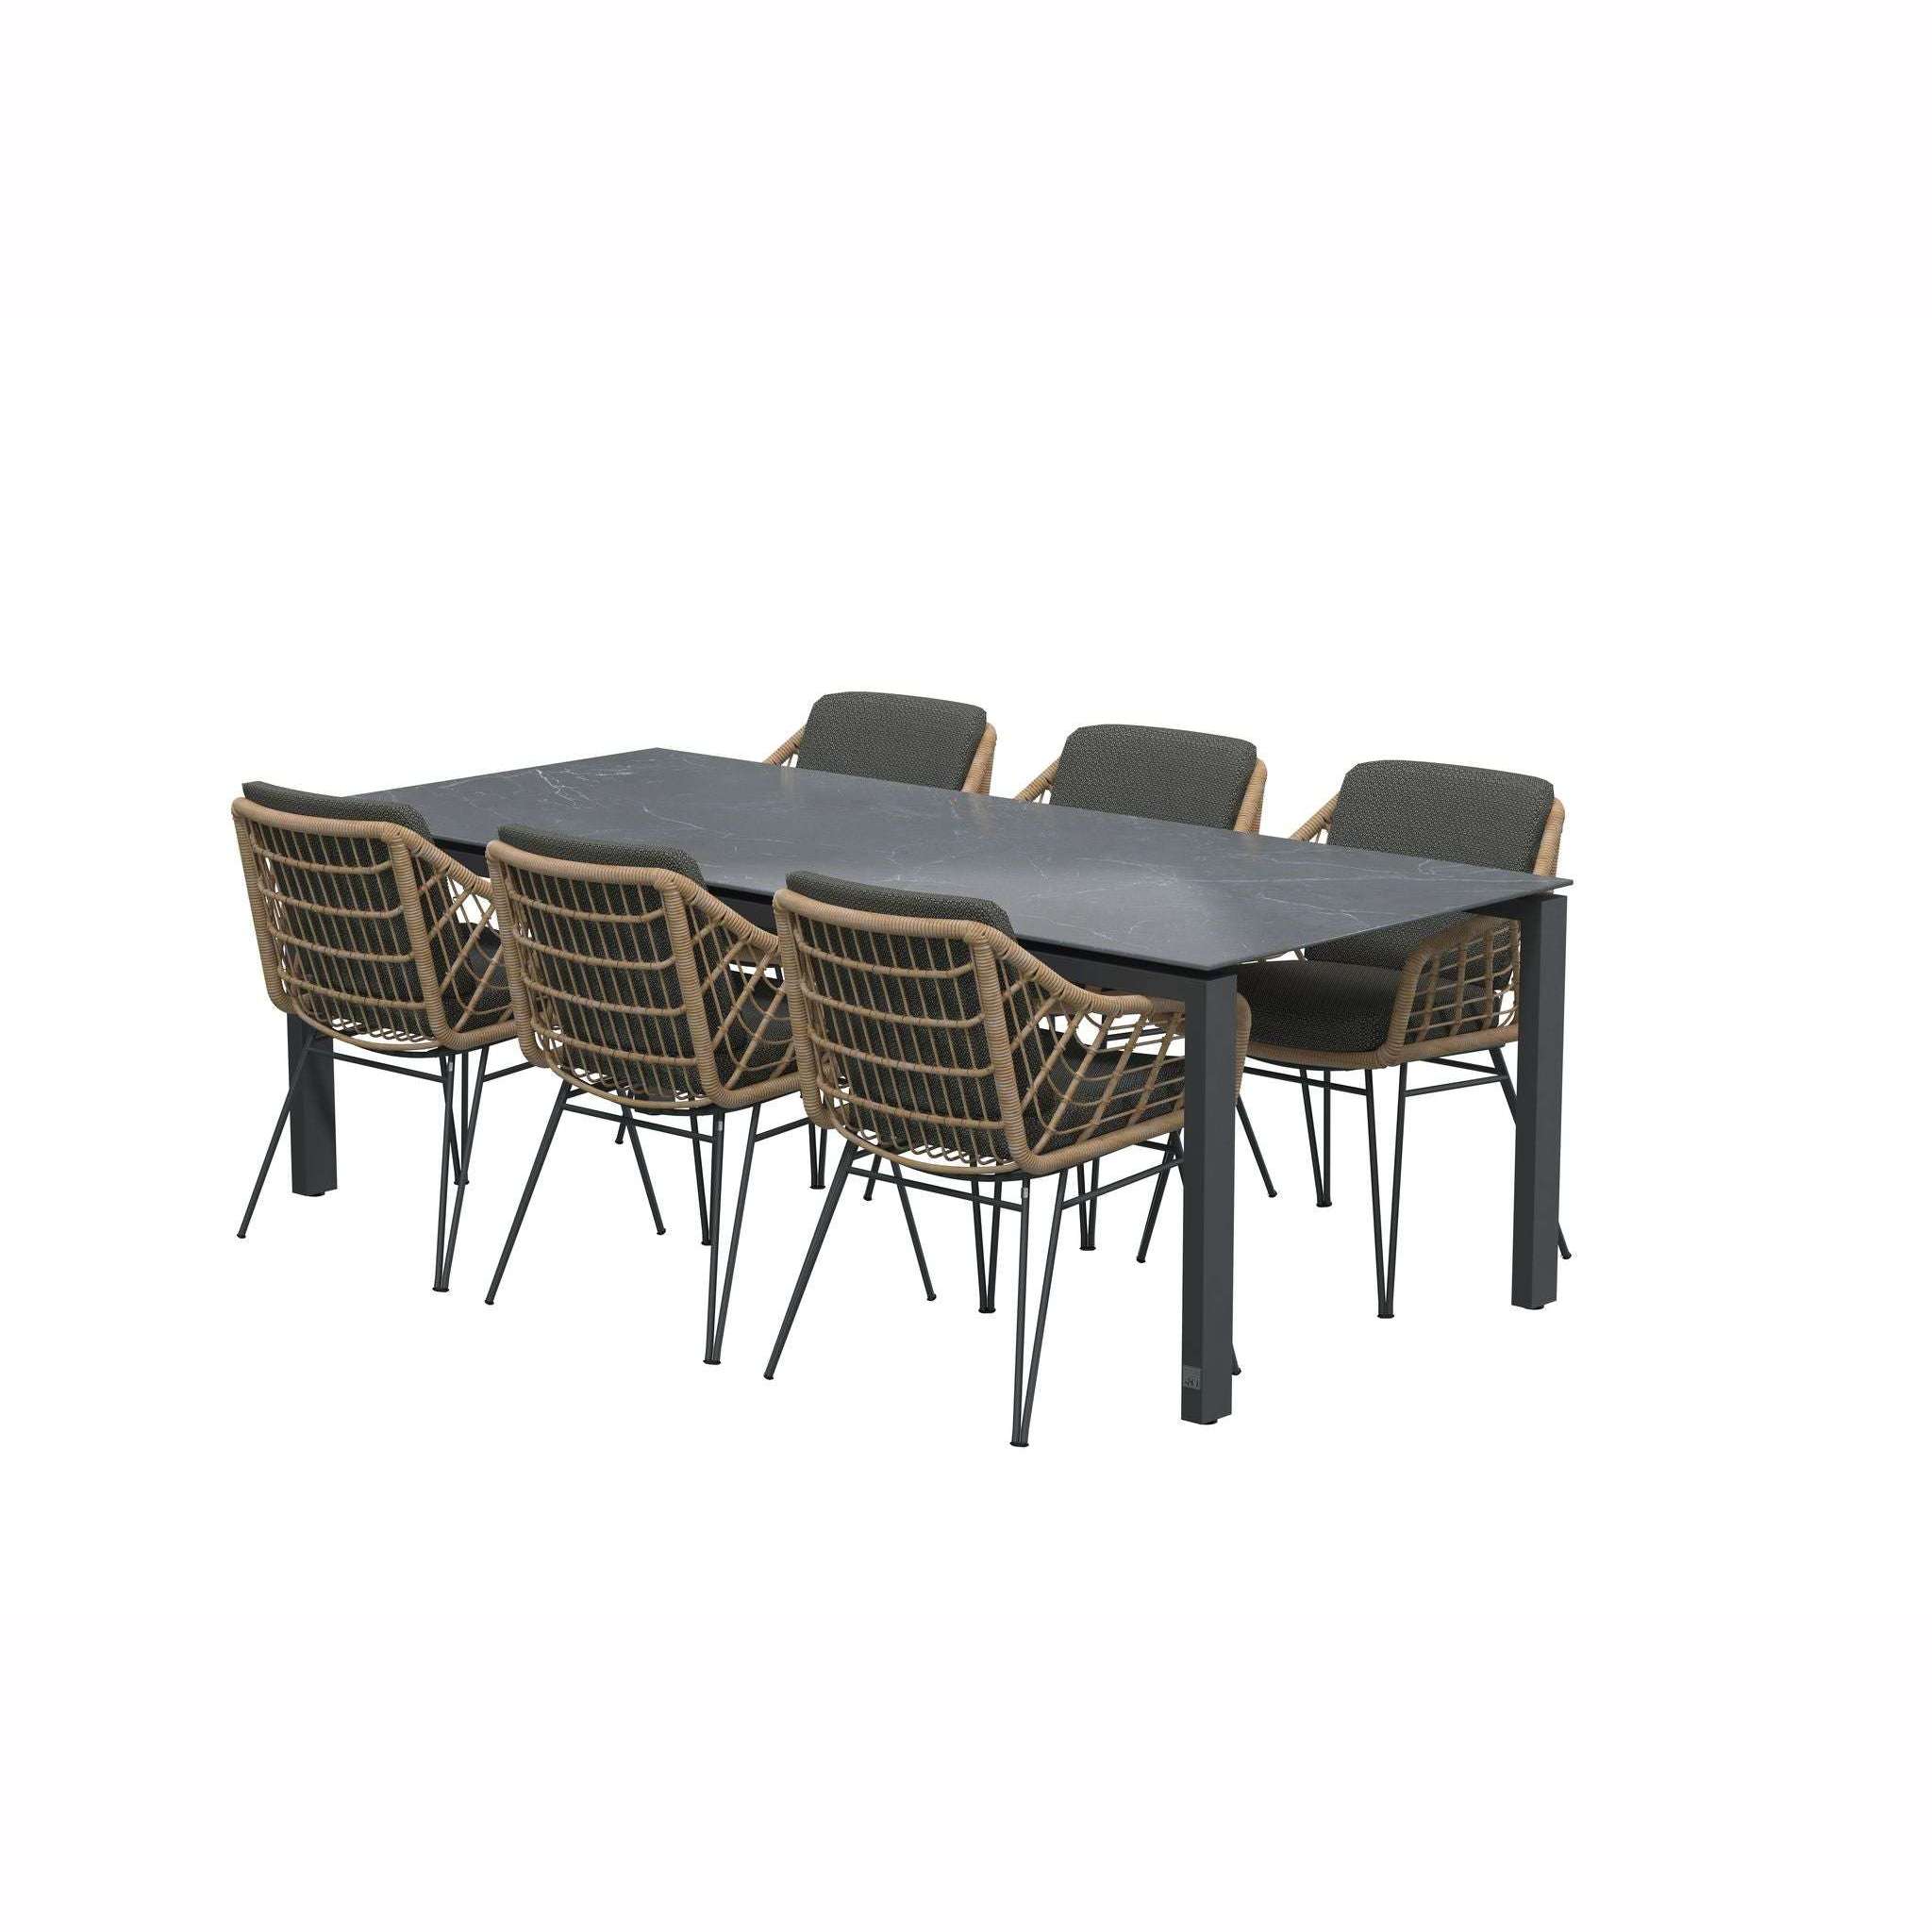 Exceptional Garden:4 Seasons Outdoor Cottage Hara 6 seater Dining set with 220cm Goa HPL Dining Table